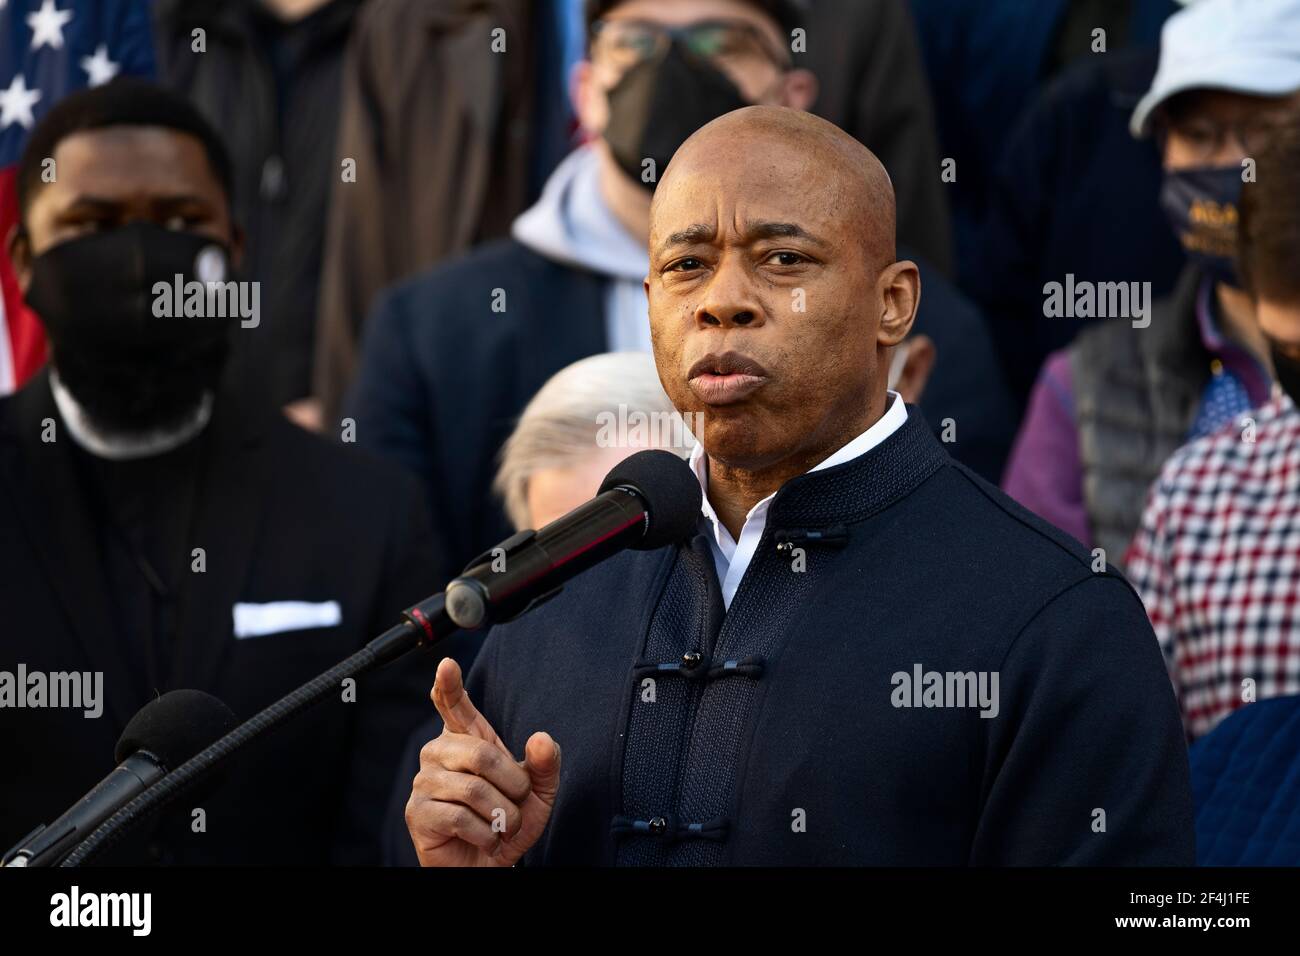 Brooklyn, New York, USA. 21 March 2021 Brooklyn Borough President Eric Adams speaks during rally against violence and discrimination after recent attacks against Asian-Americans in New York City and across the U.S. during COVID-19 pandemic. Adams is running for mayor of New York City this year. Credit: Joseph Reid/Alamy Live News Stock Photo